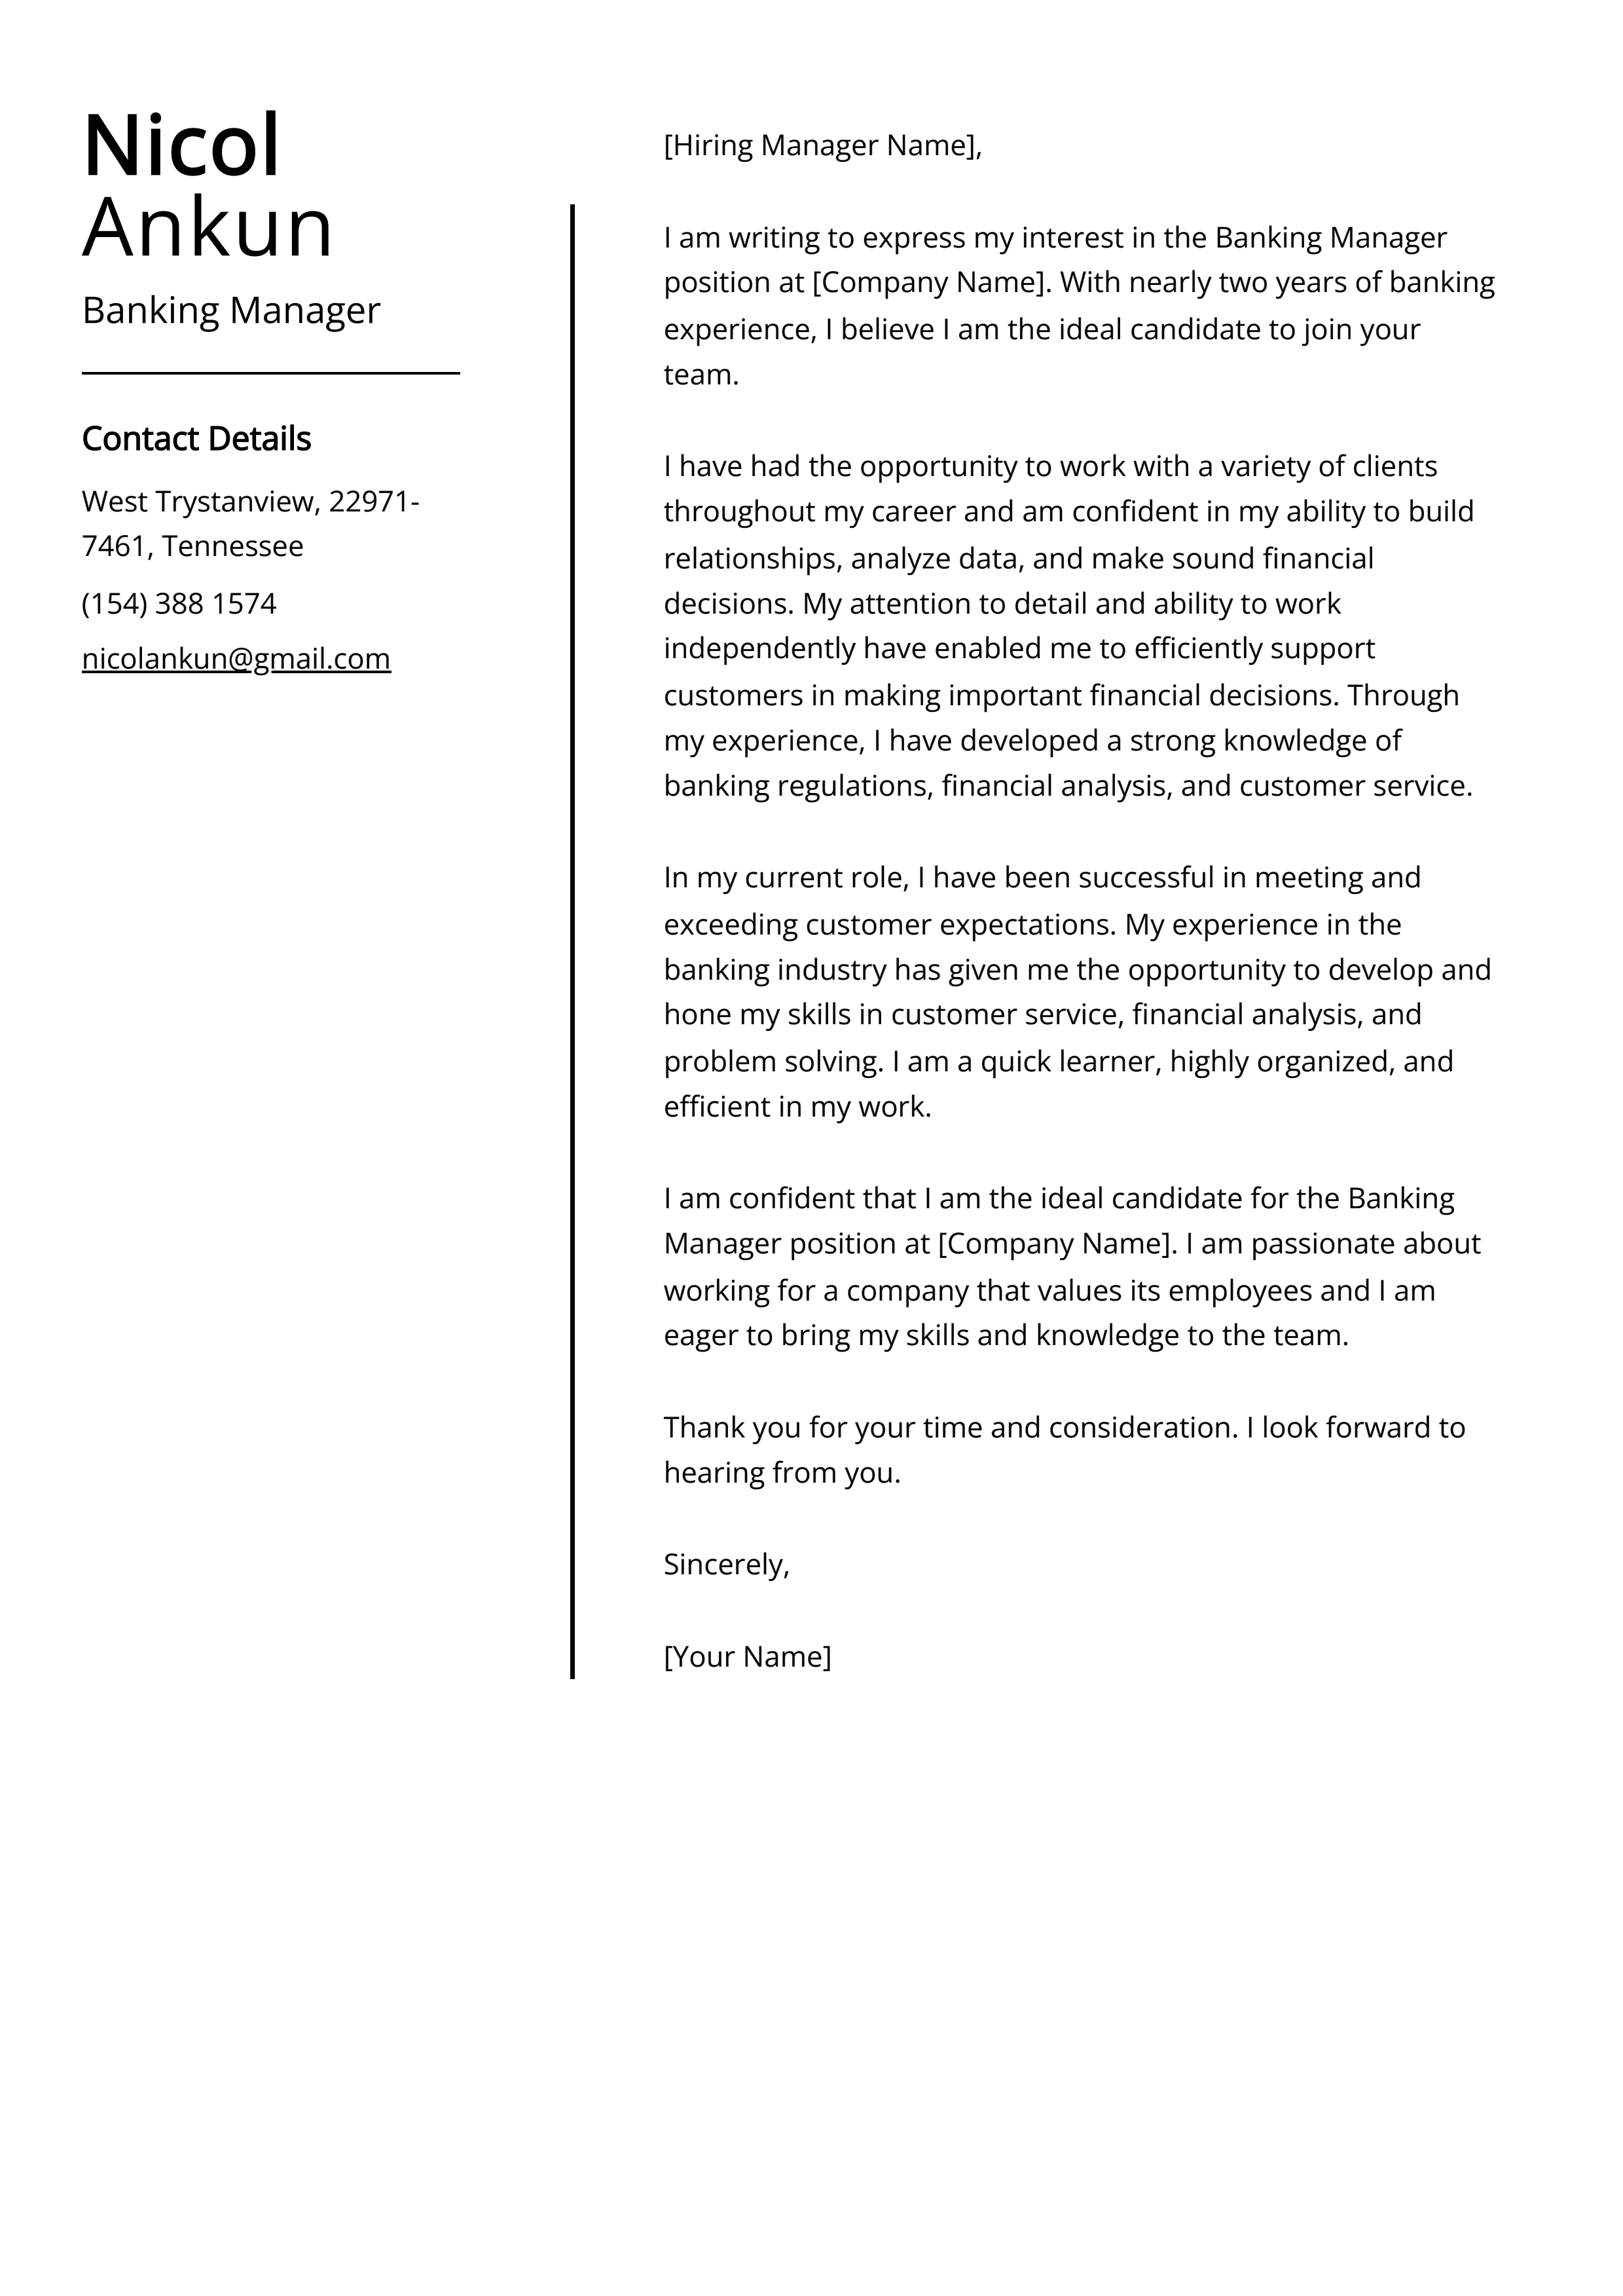 Banking Manager Cover Letter Example